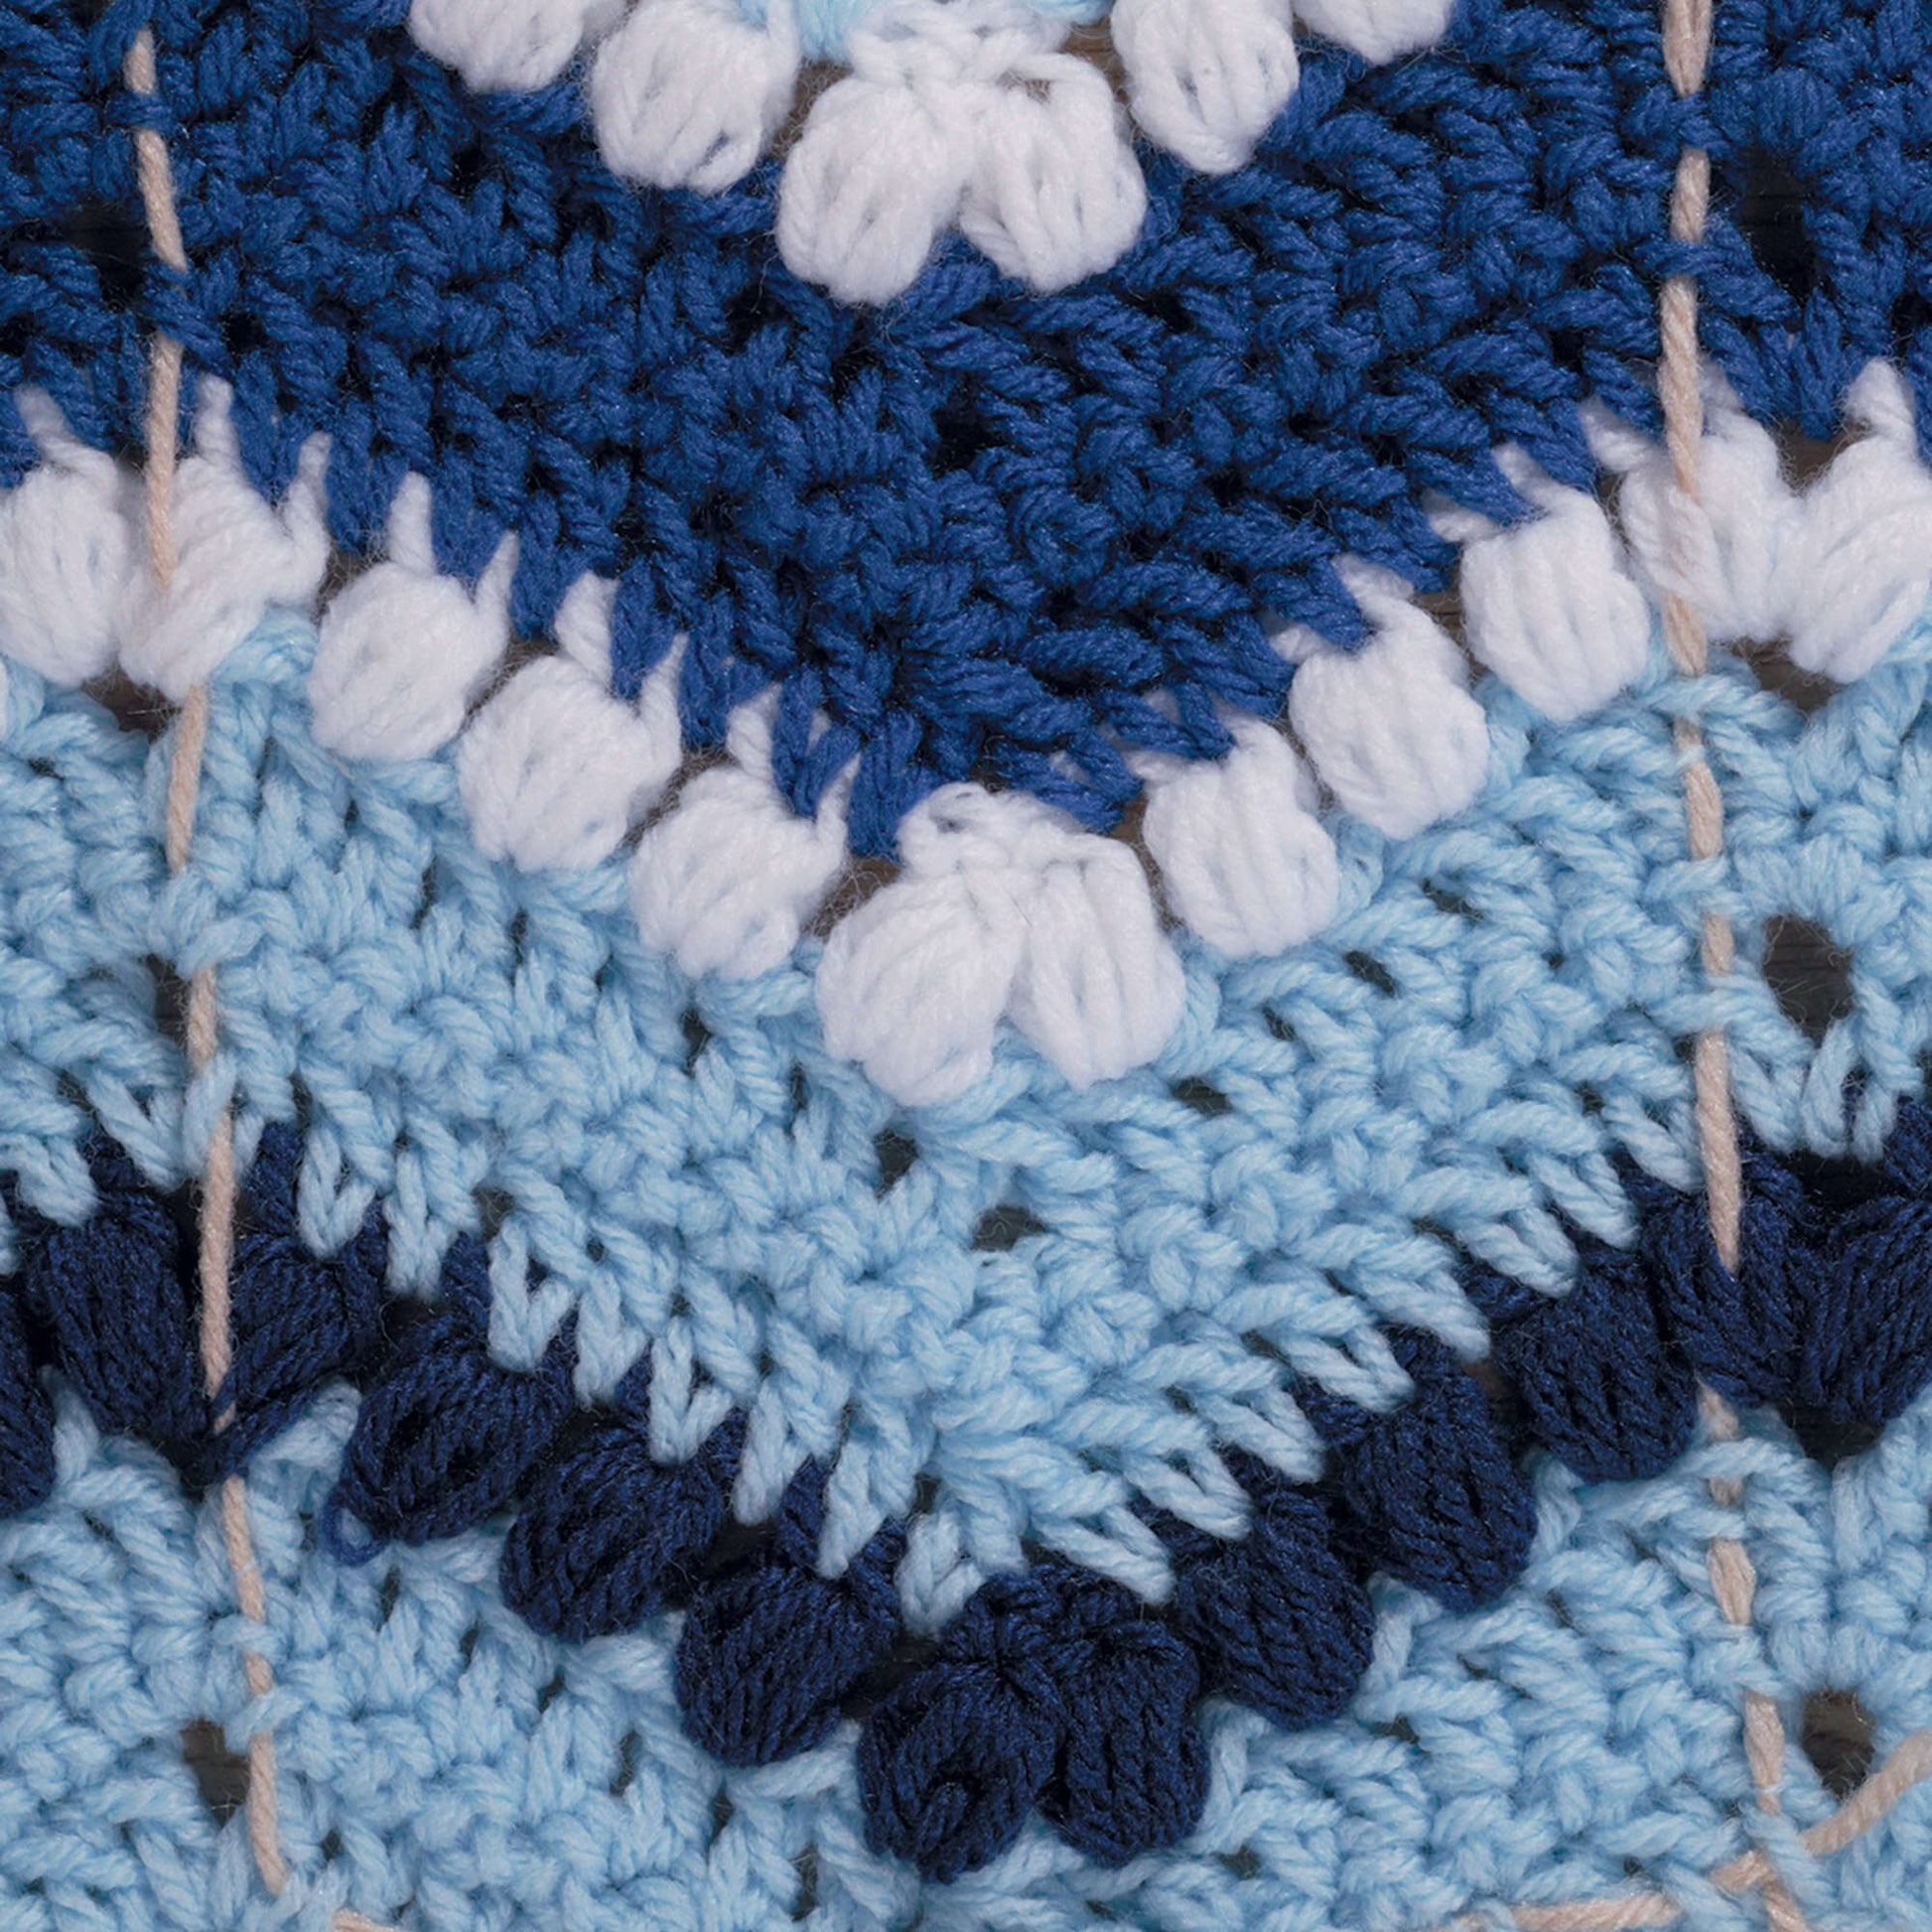 Red Heart Yarns - Combine an simple ripple stitch with the